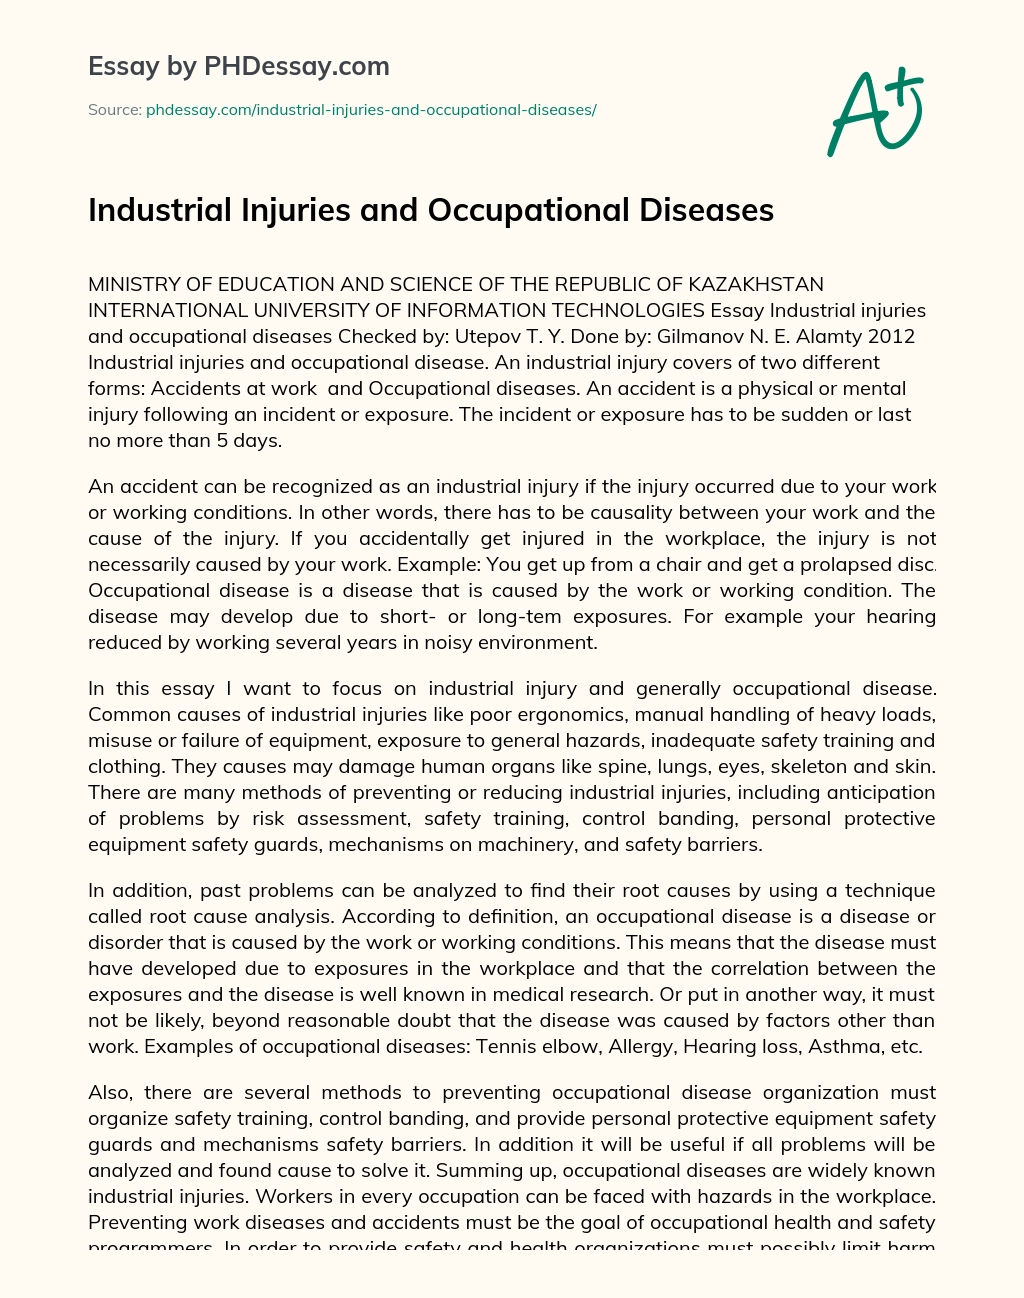 Industrial Injuries and Occupational Diseases essay